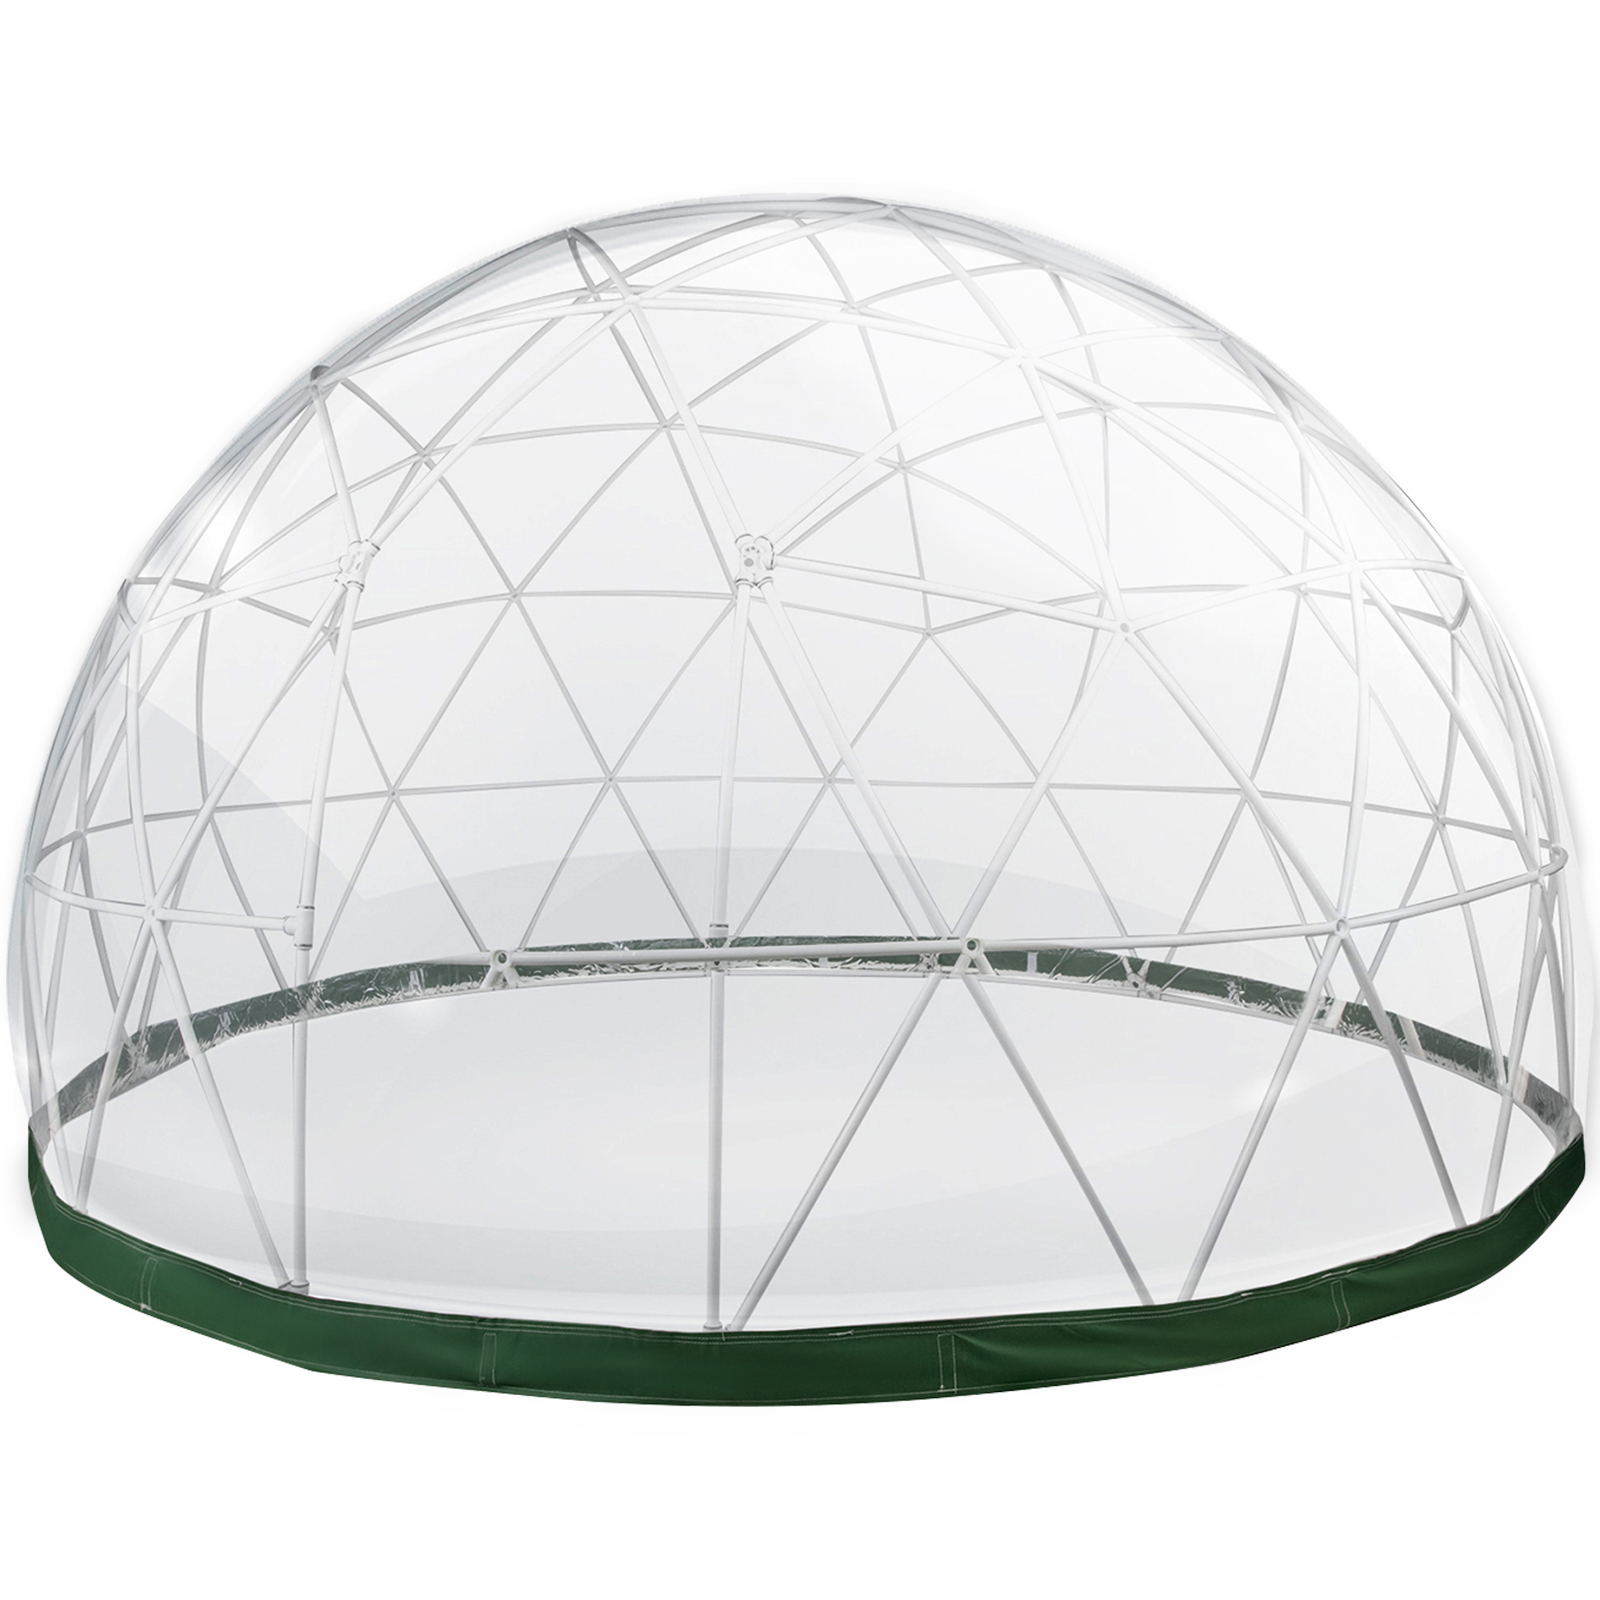 Garden Dome Bubble Tent 9.5ft Greenhouse Dome Pvc Garden Igloo Geodesic Dome Kit от Vevor Many GEOs